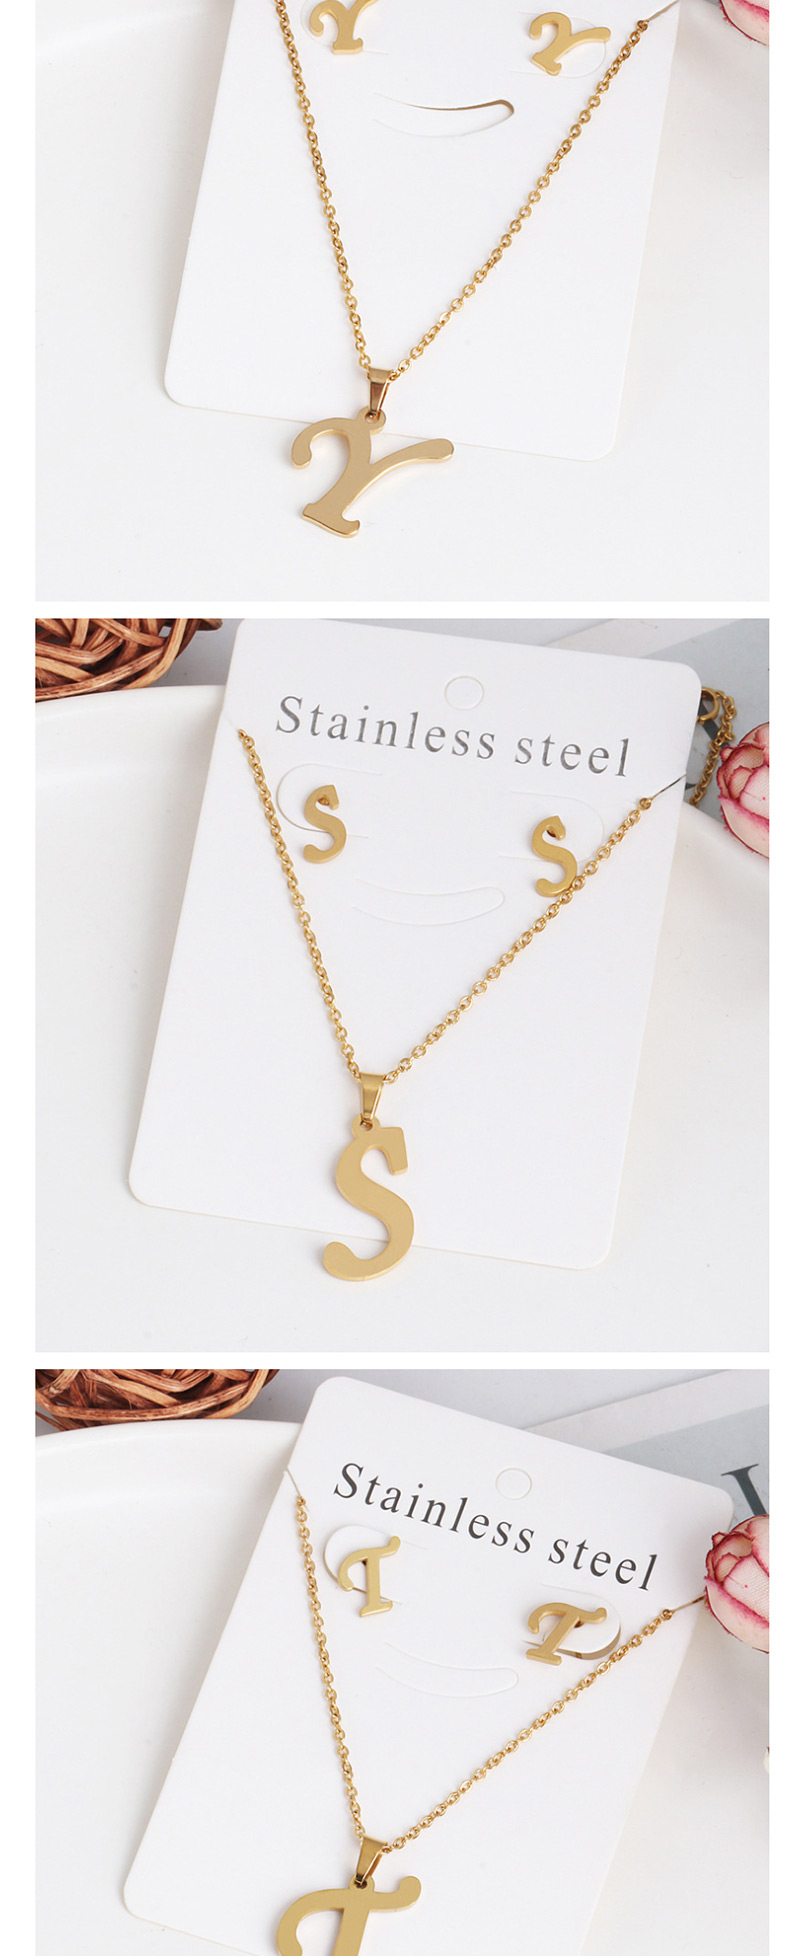 Fashion F Gold Stainless Steel Letter Necklace Earrings Two-piece,Jewelry Sets